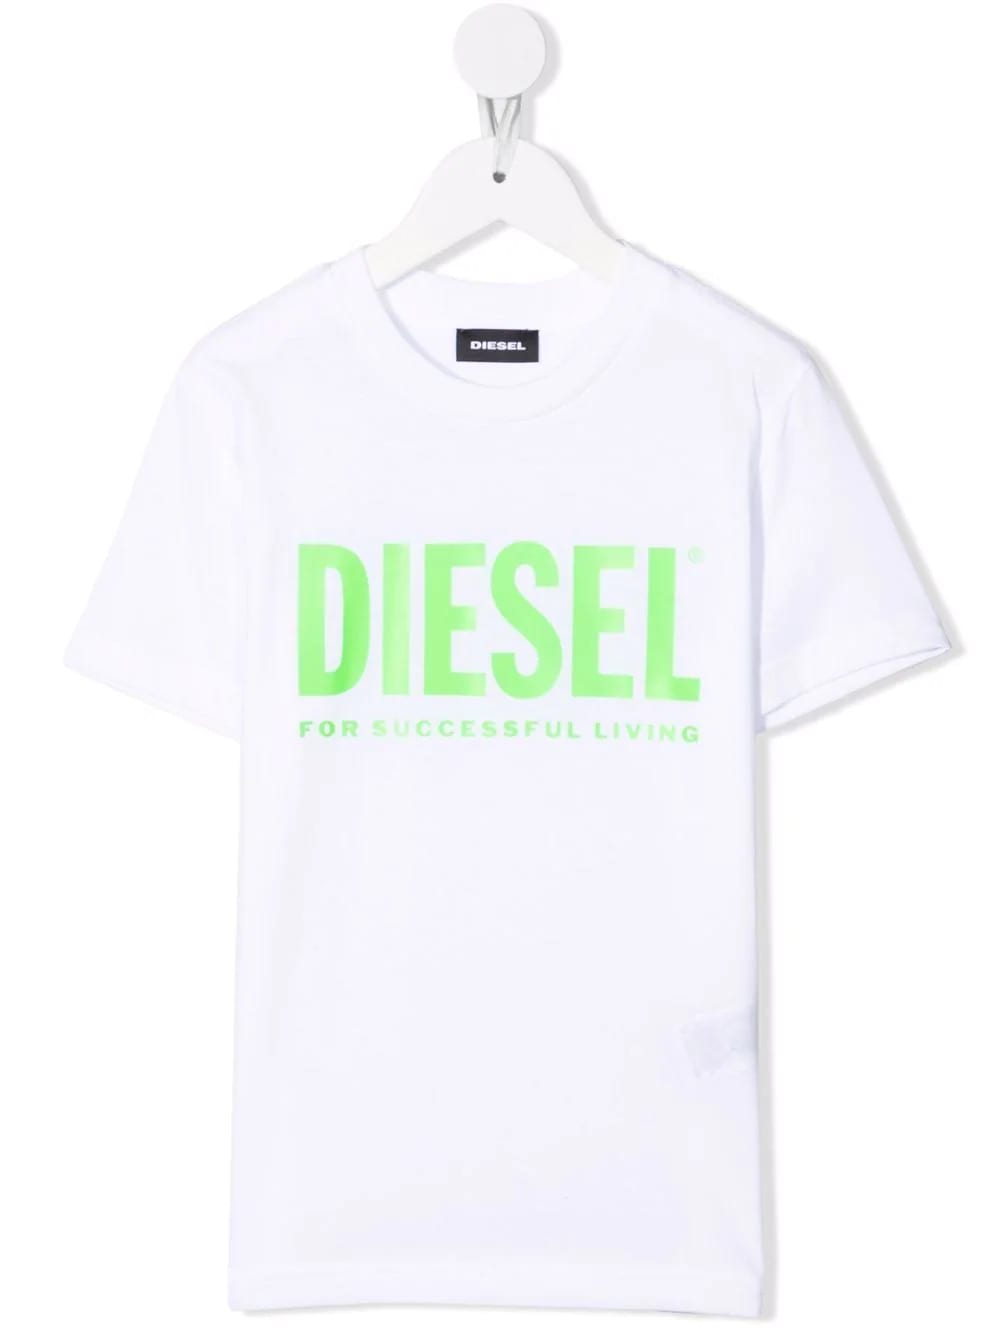 Diesel Kids White T-shirt With Fluo Green Oversize Logo